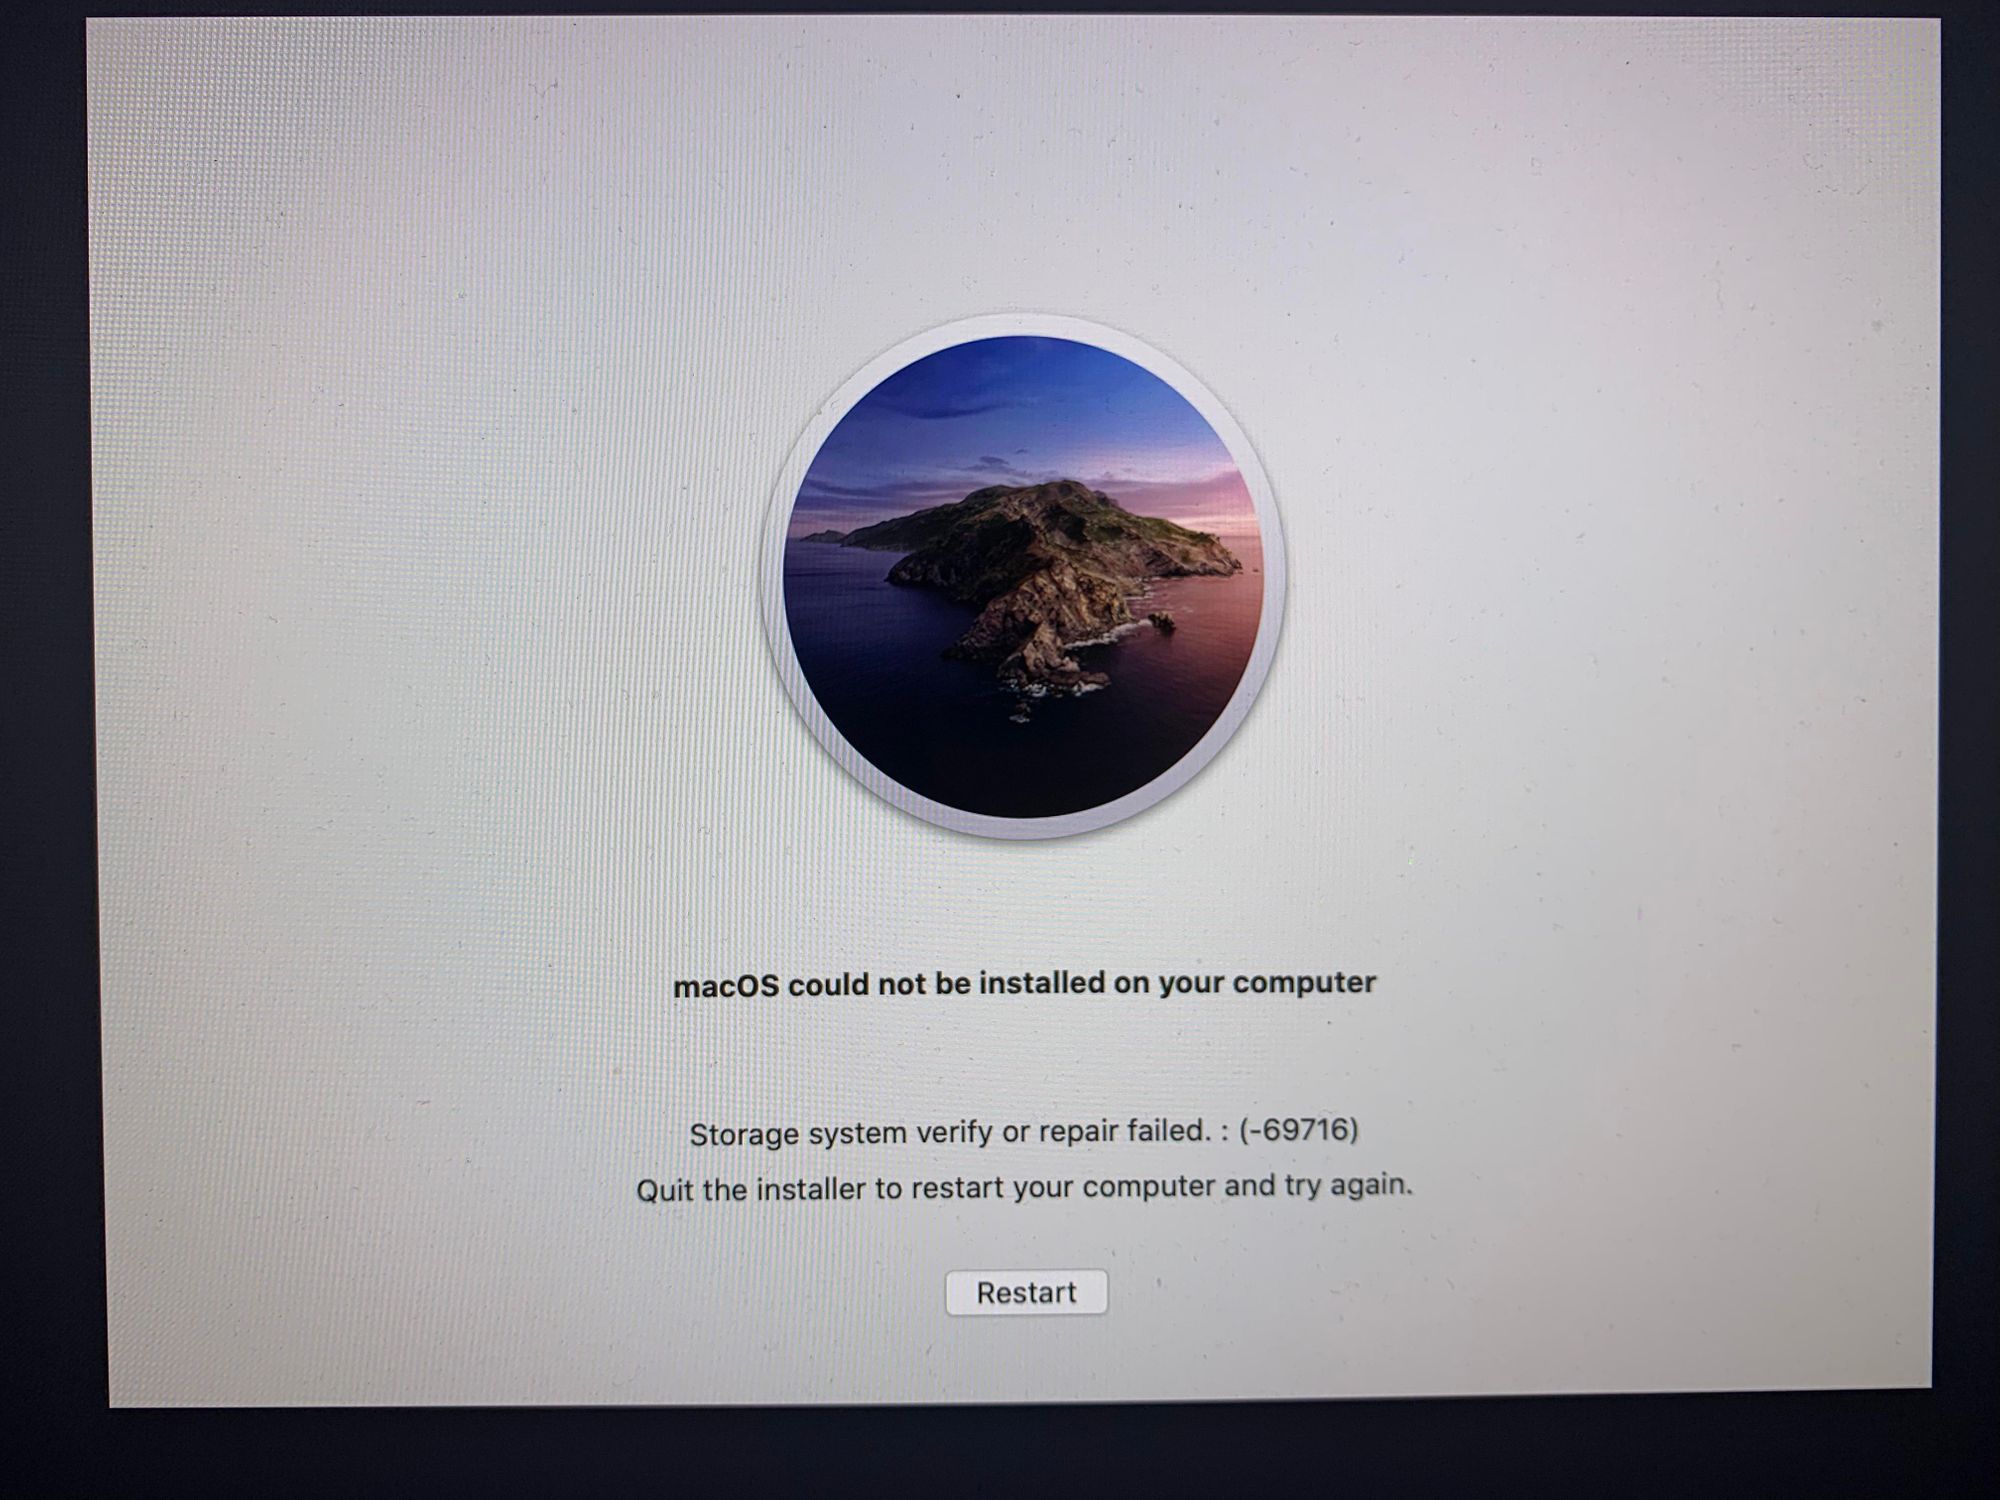 I forgot to take a picture so I sourced this one from Reddit - https://www.reddit.com/r/MacOSBeta/comments/d39pk6/i_get_this_error_whenever_i_try_to_install_the/